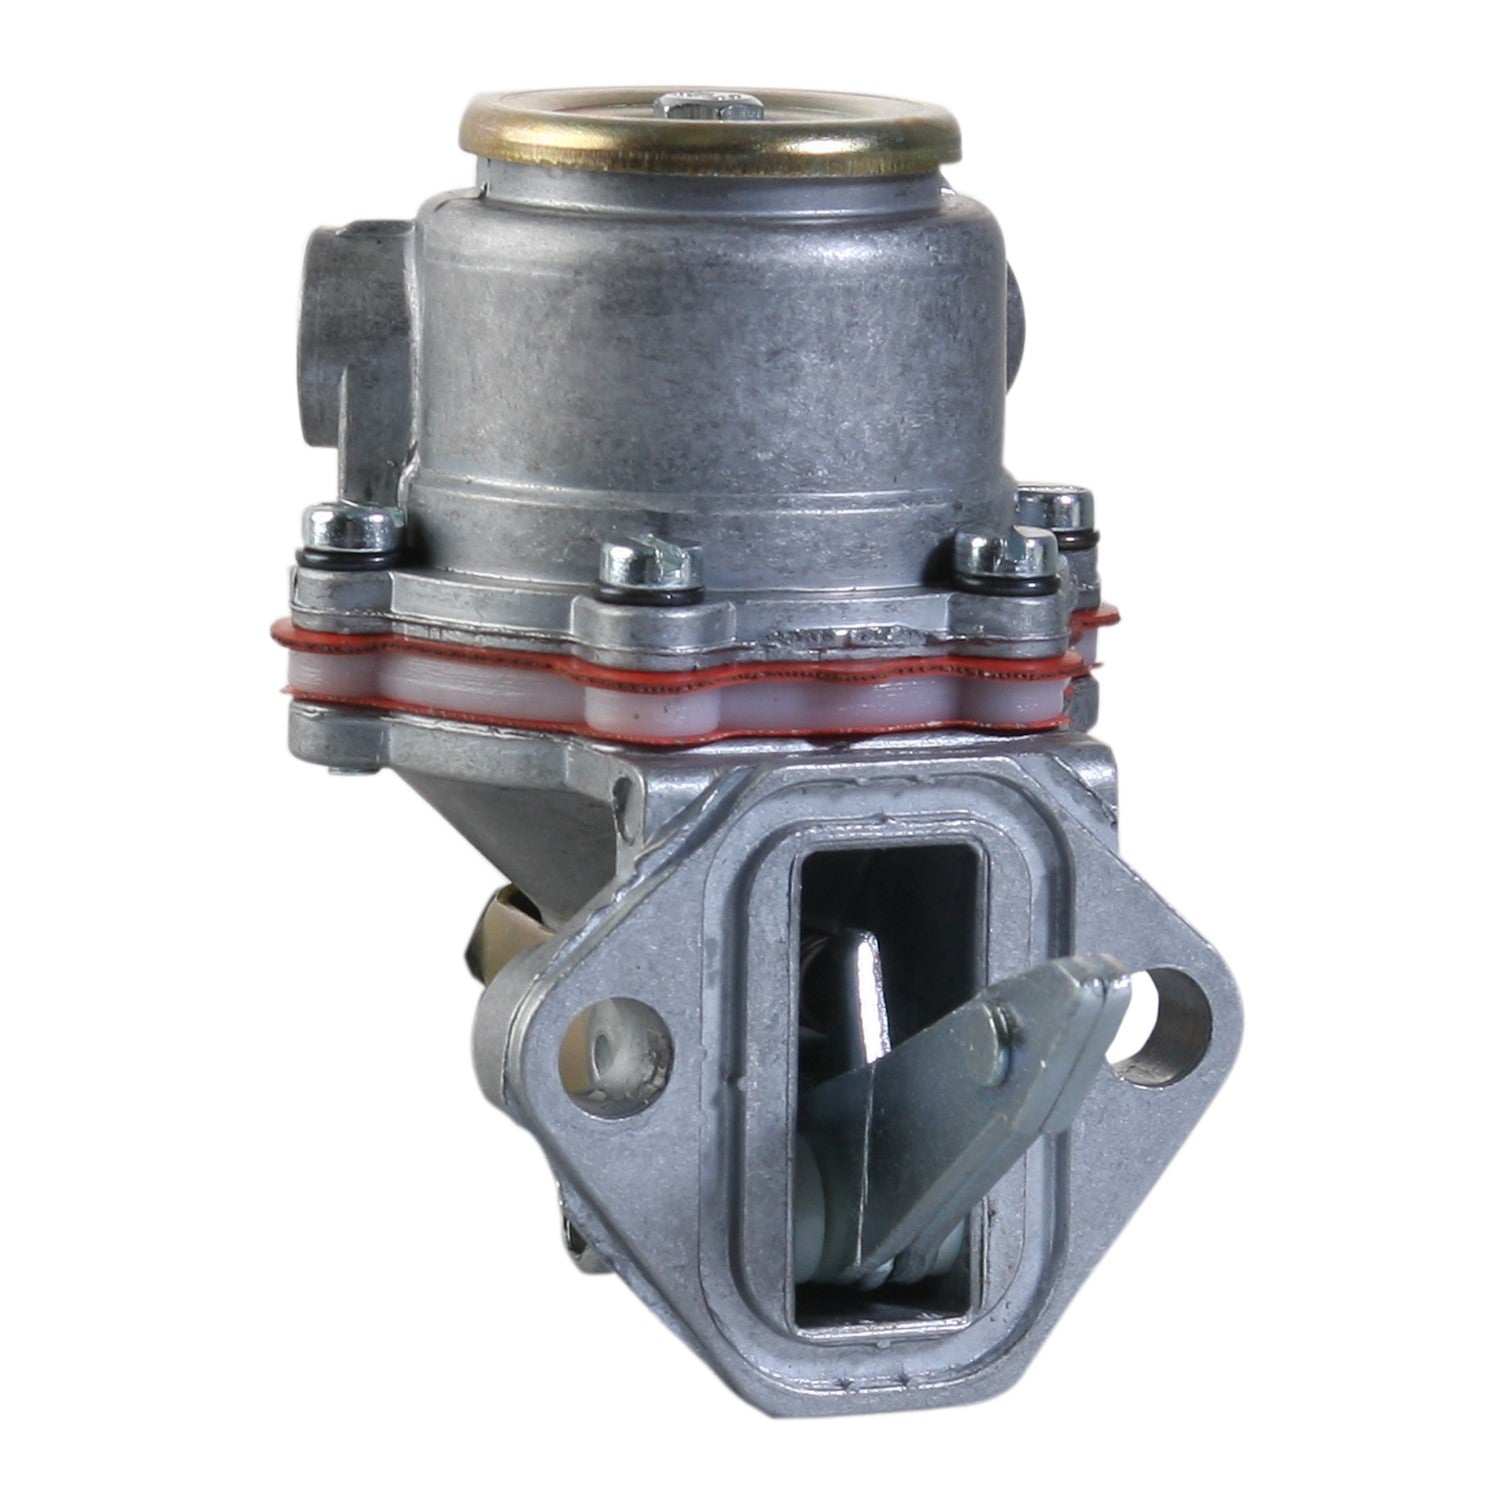 Fuel Pump Replacement for Iveco;Diesel 8045.25.282 99485050